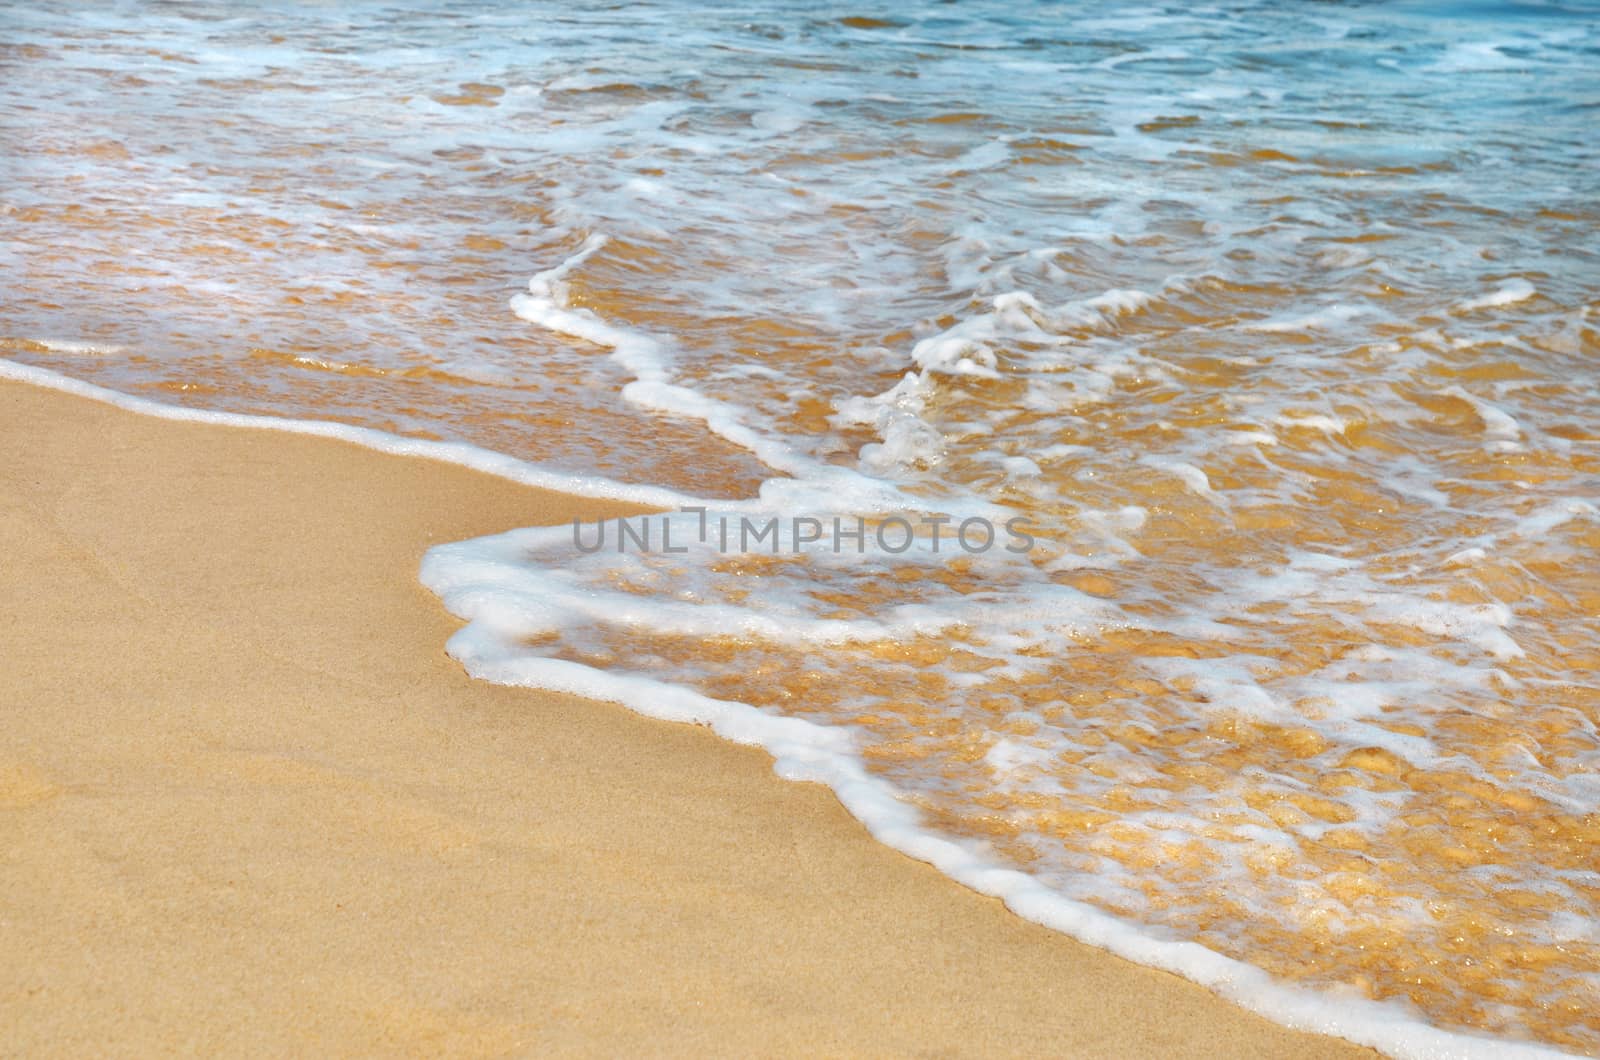 Summer holiday background. Small wave and foam, yellow, clean sandy beach.